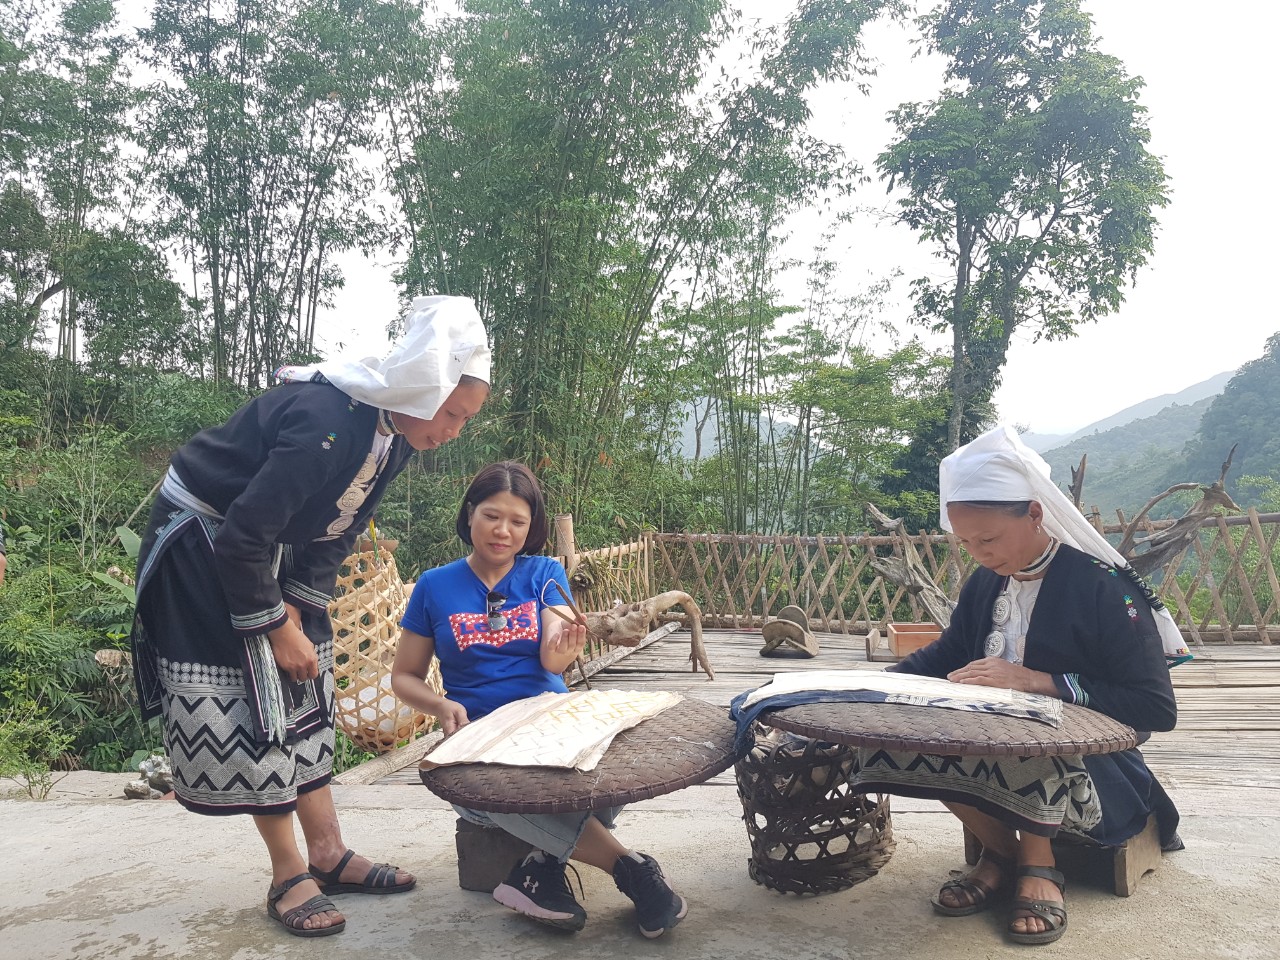 Printing patterns on fabric with beeswax is a tourist service that many tourists love when coming to Hoai Khao hamlet, Quang Thanh commune (Nguyen Binh, Cao Bang).